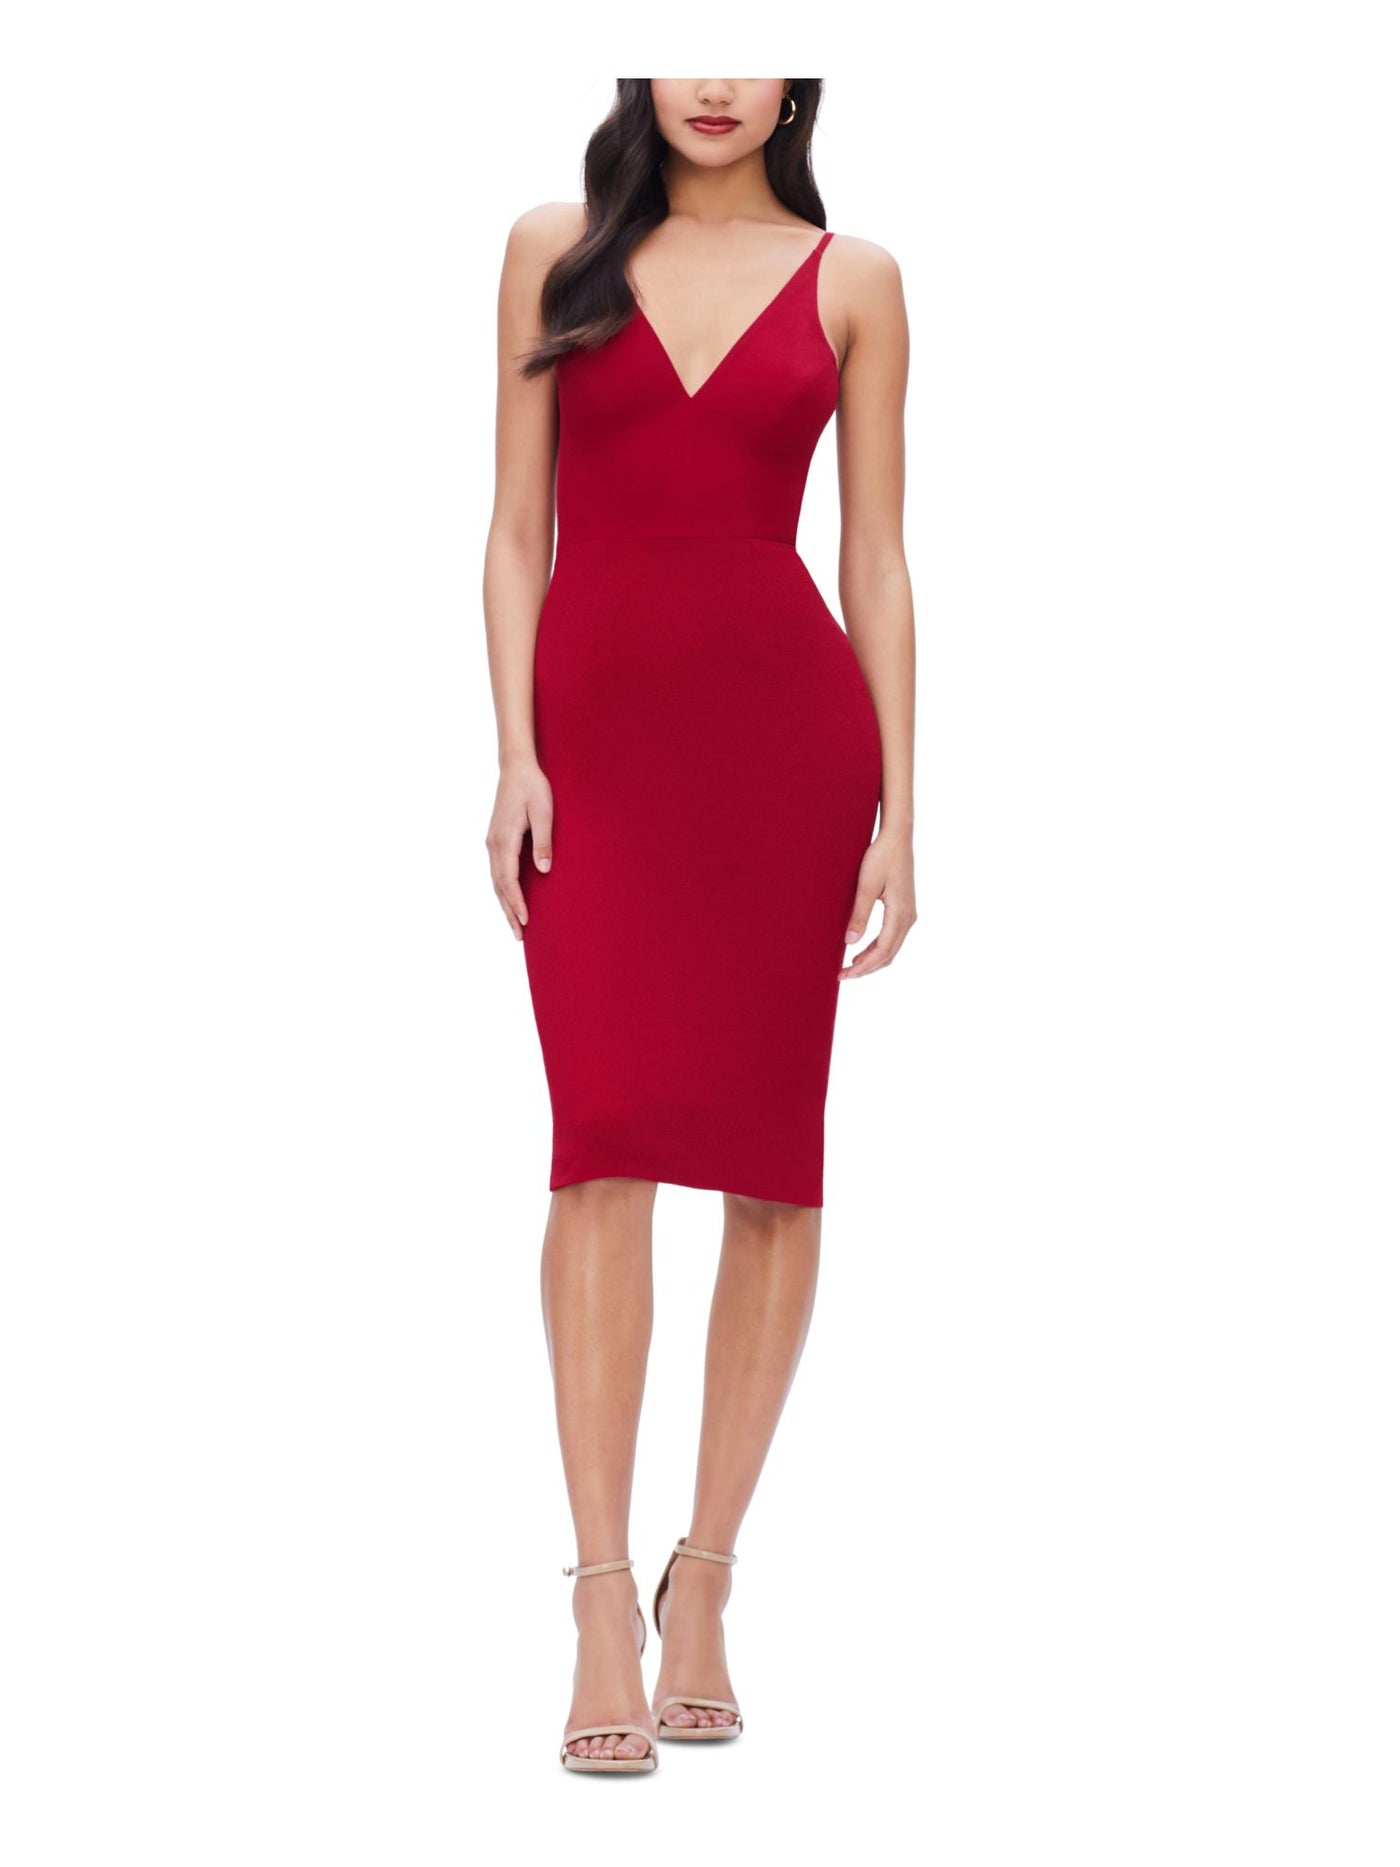 DRESS THE POPULATION Womens Red Zippered Slitted Lined Sleeveless V Neck Knee Length Cocktail Body Con Dress S